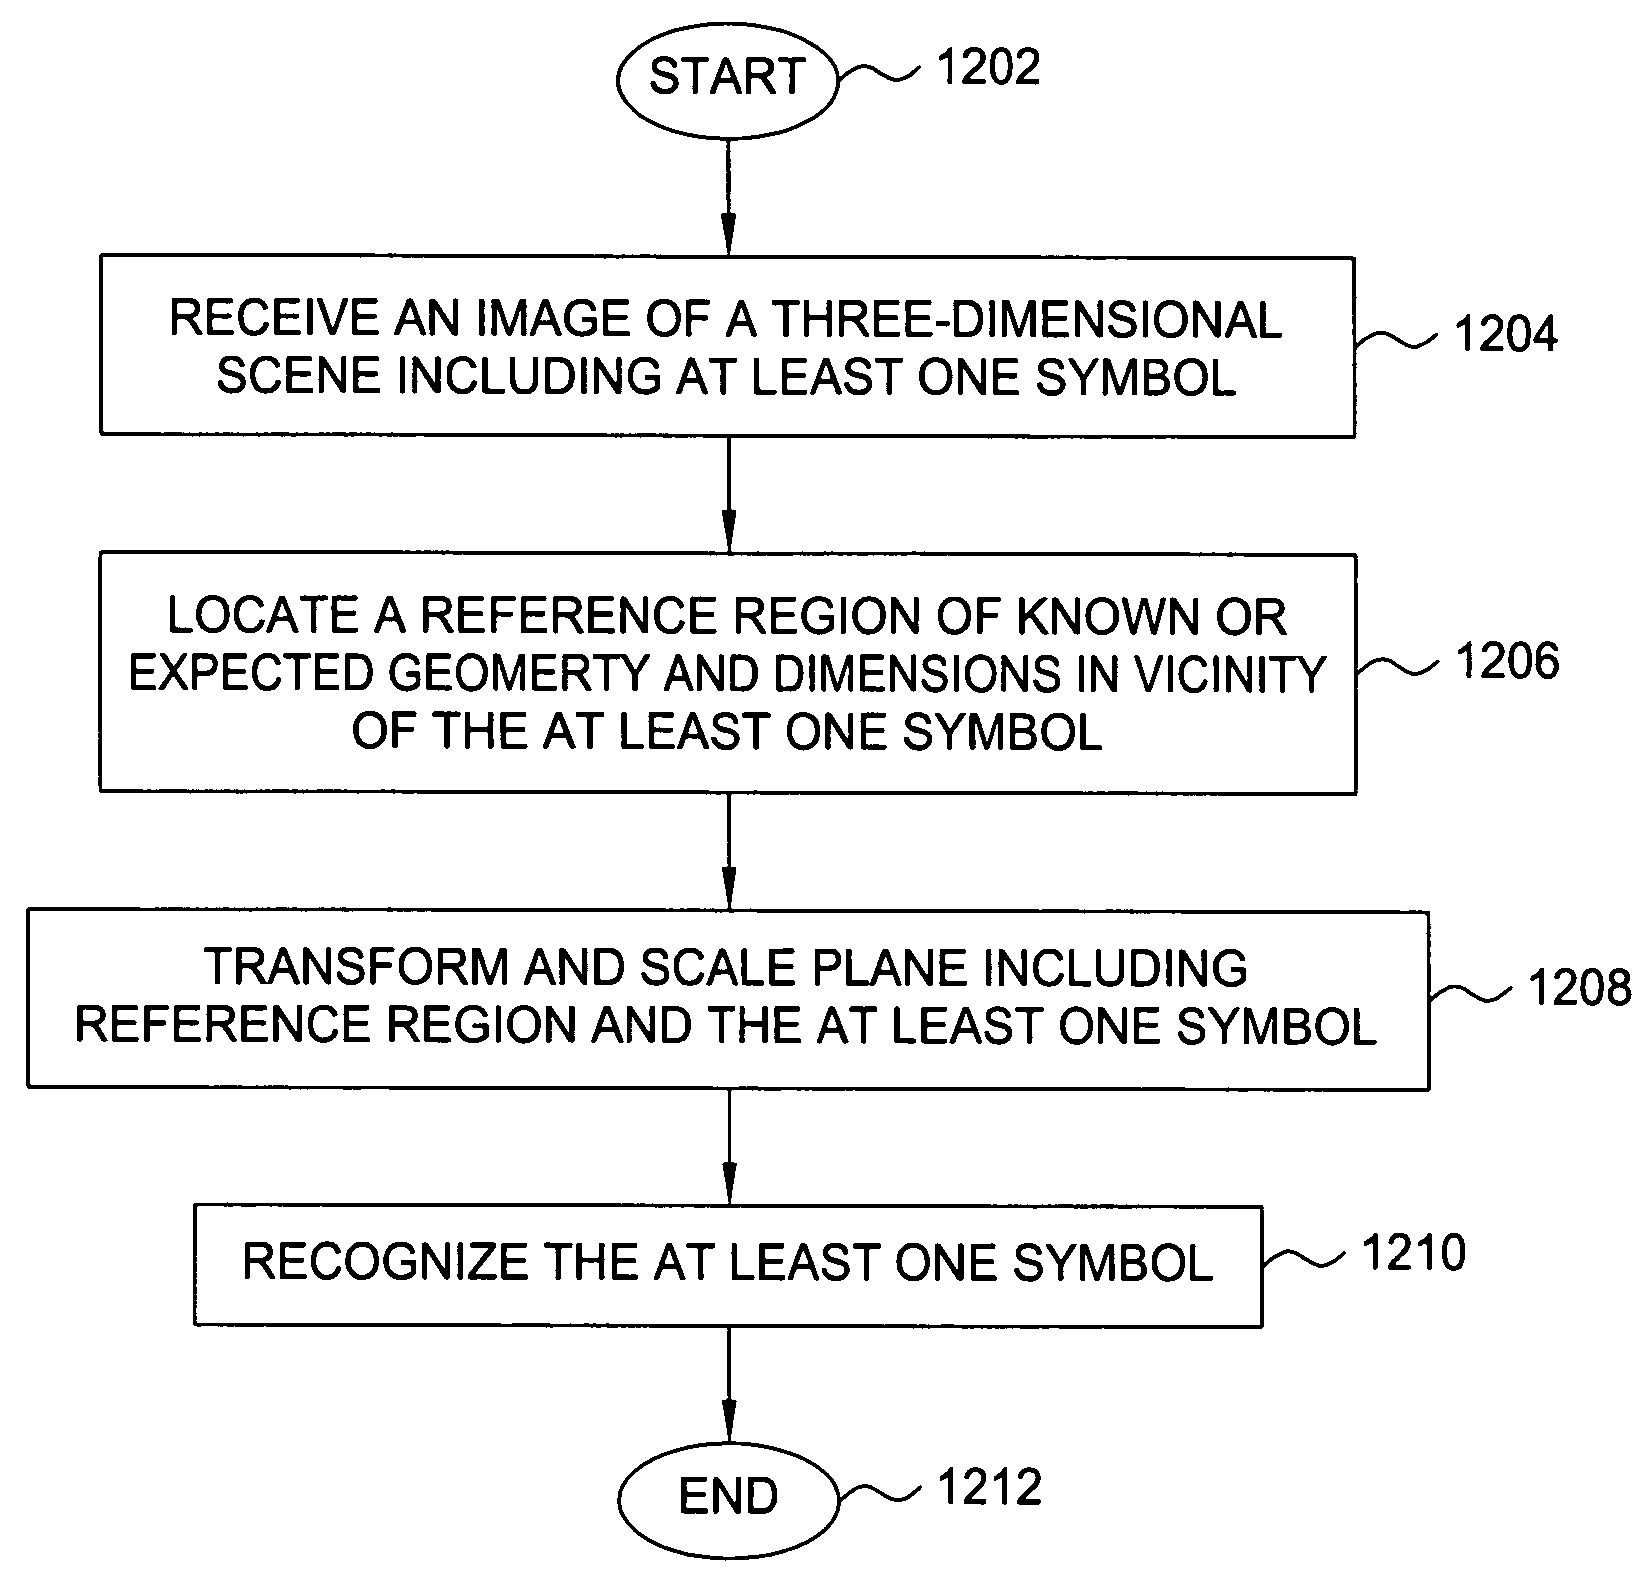 Method and apparatus for recognition of symbols in images of three-dimensional scenes